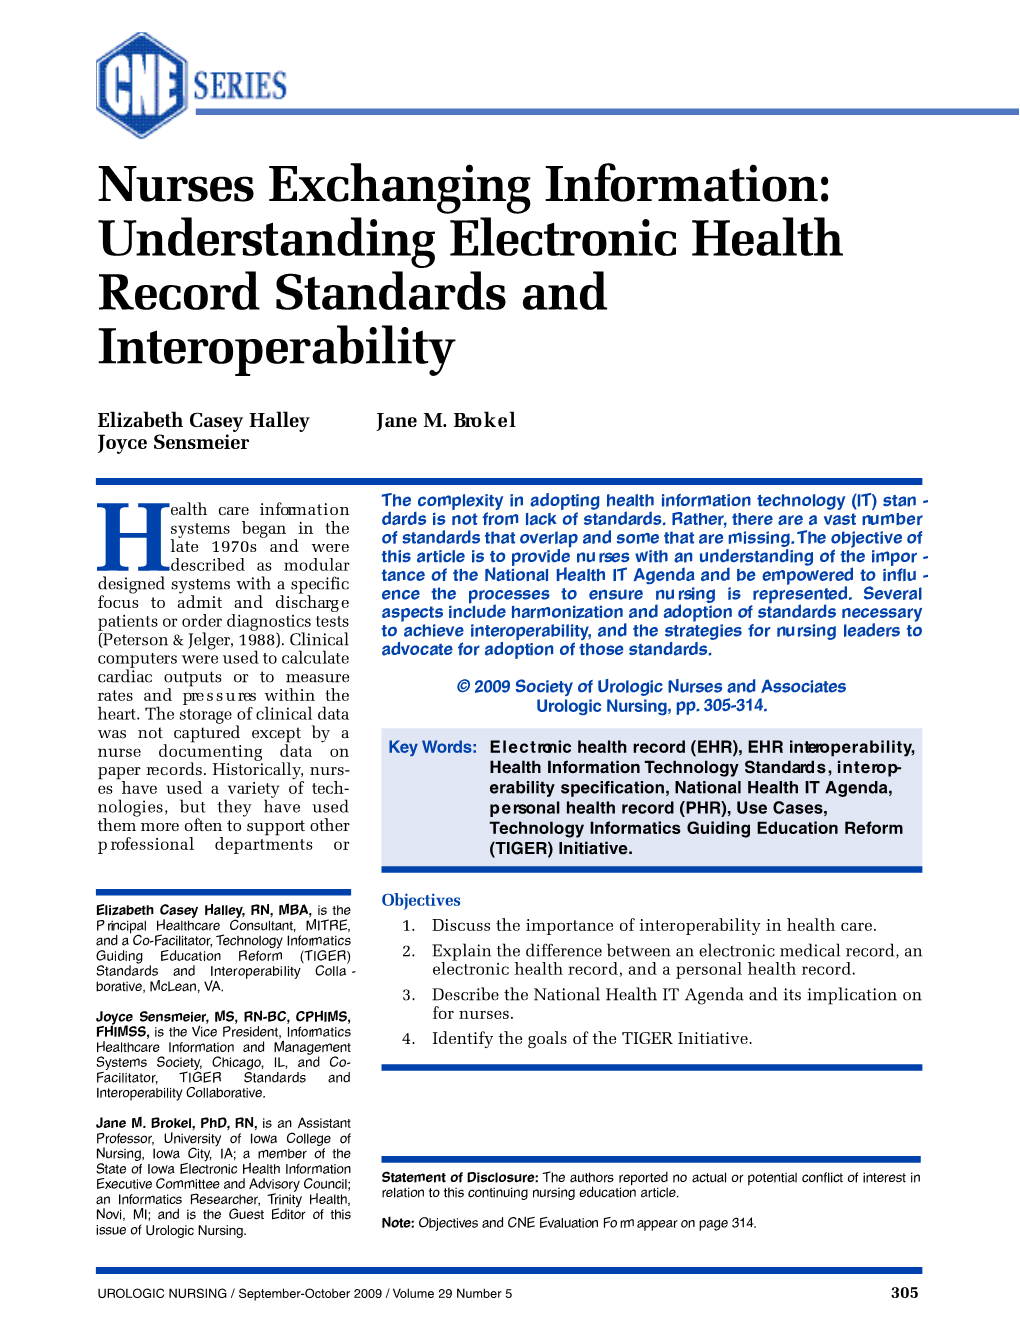 Nurses Exchanging Inform a T I O N : Understanding Electronic Health R E C O Rd Standards and I N T E Ro P E R a B I L I T Y